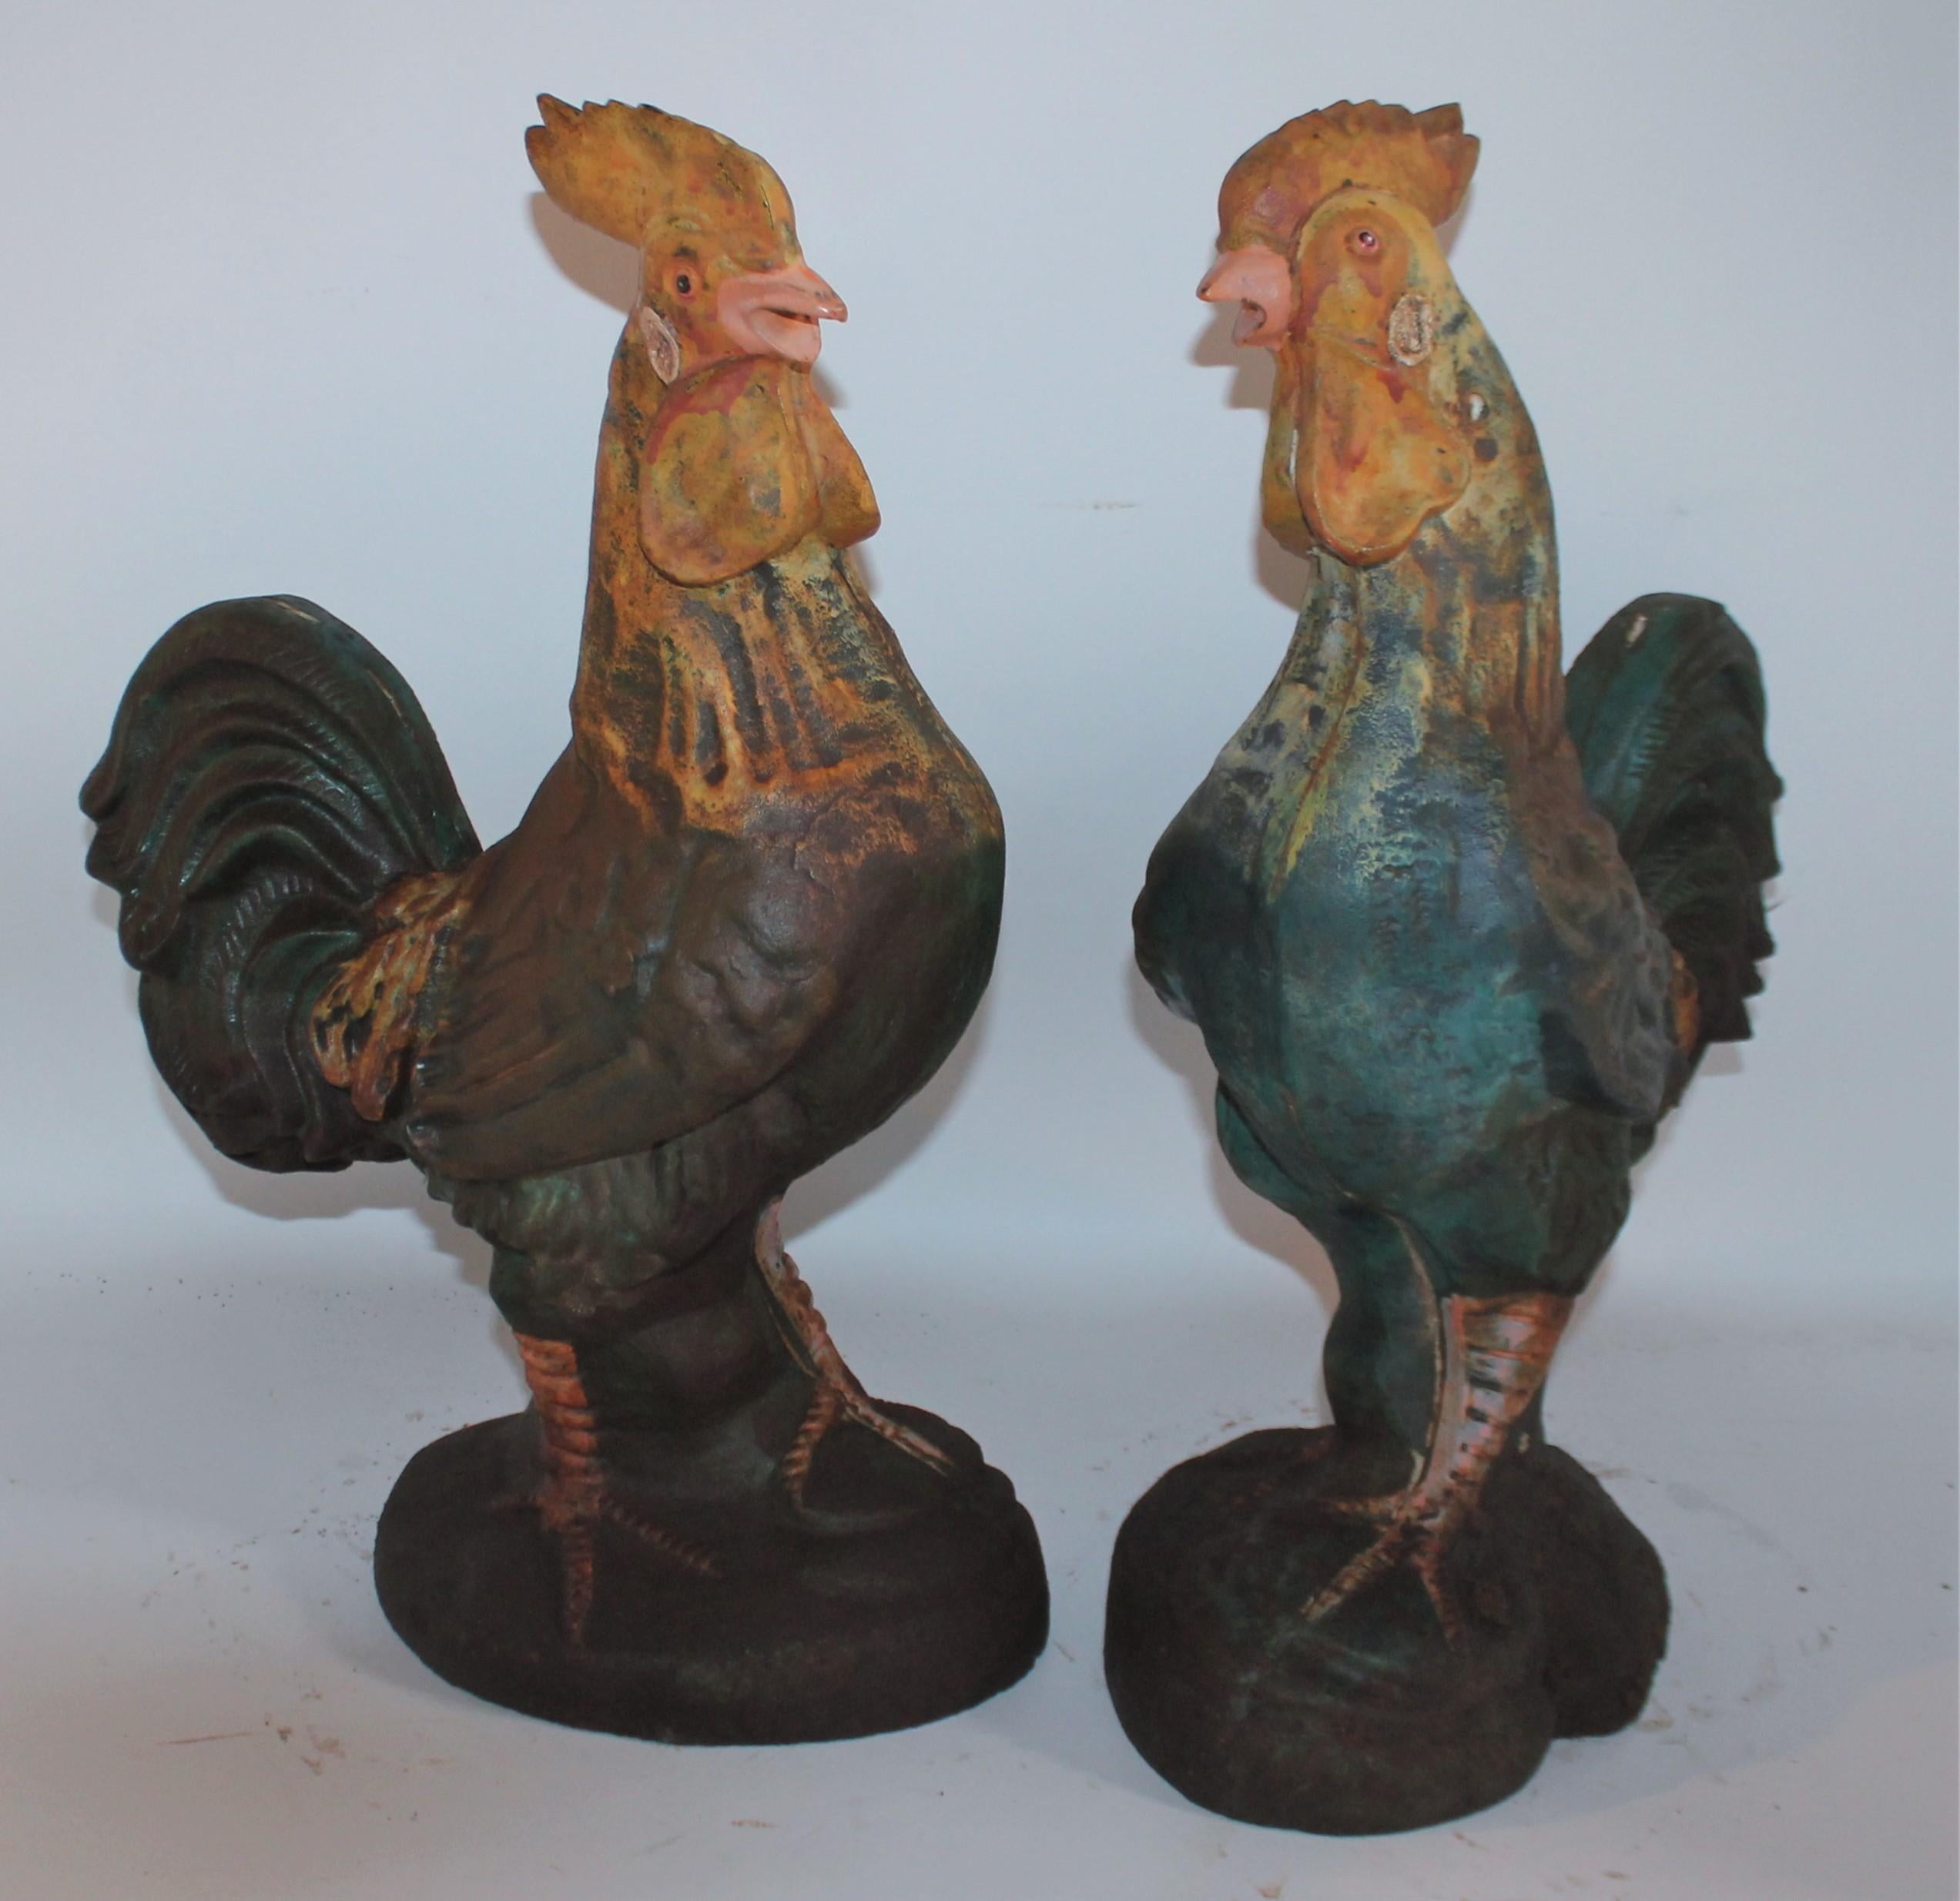 Pair of 20th century iron garden ornaments in original paint. Decorative and have great patina. These are heavy iron roosters.